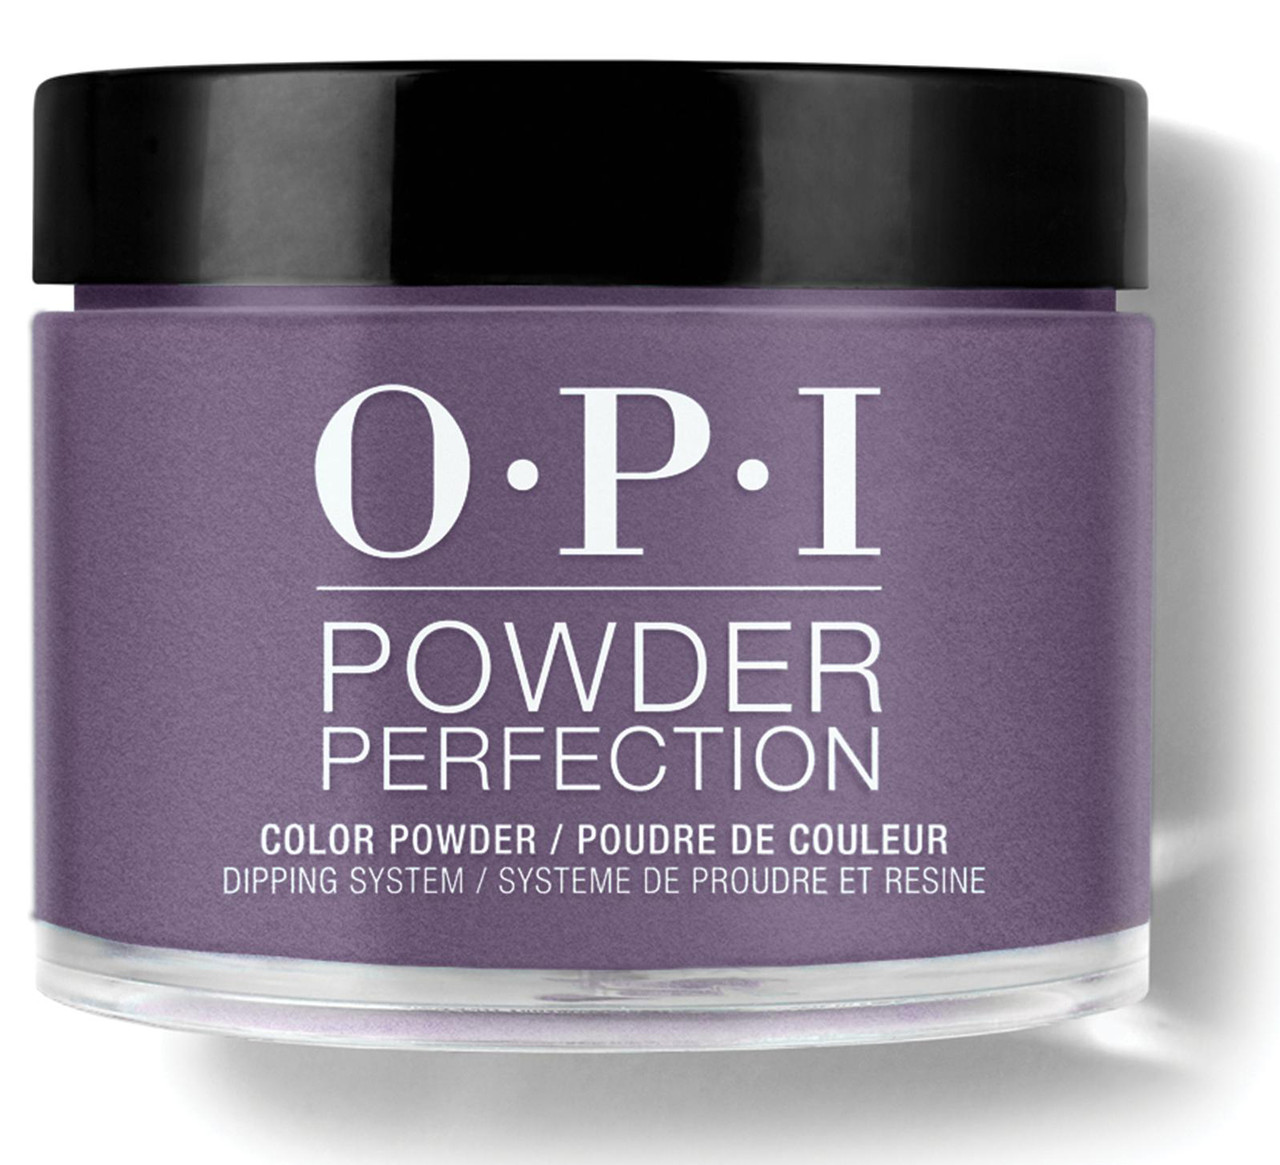 OPI Dipping Powder Perfection Abstract After Dark - 1.5 oz / 43 G